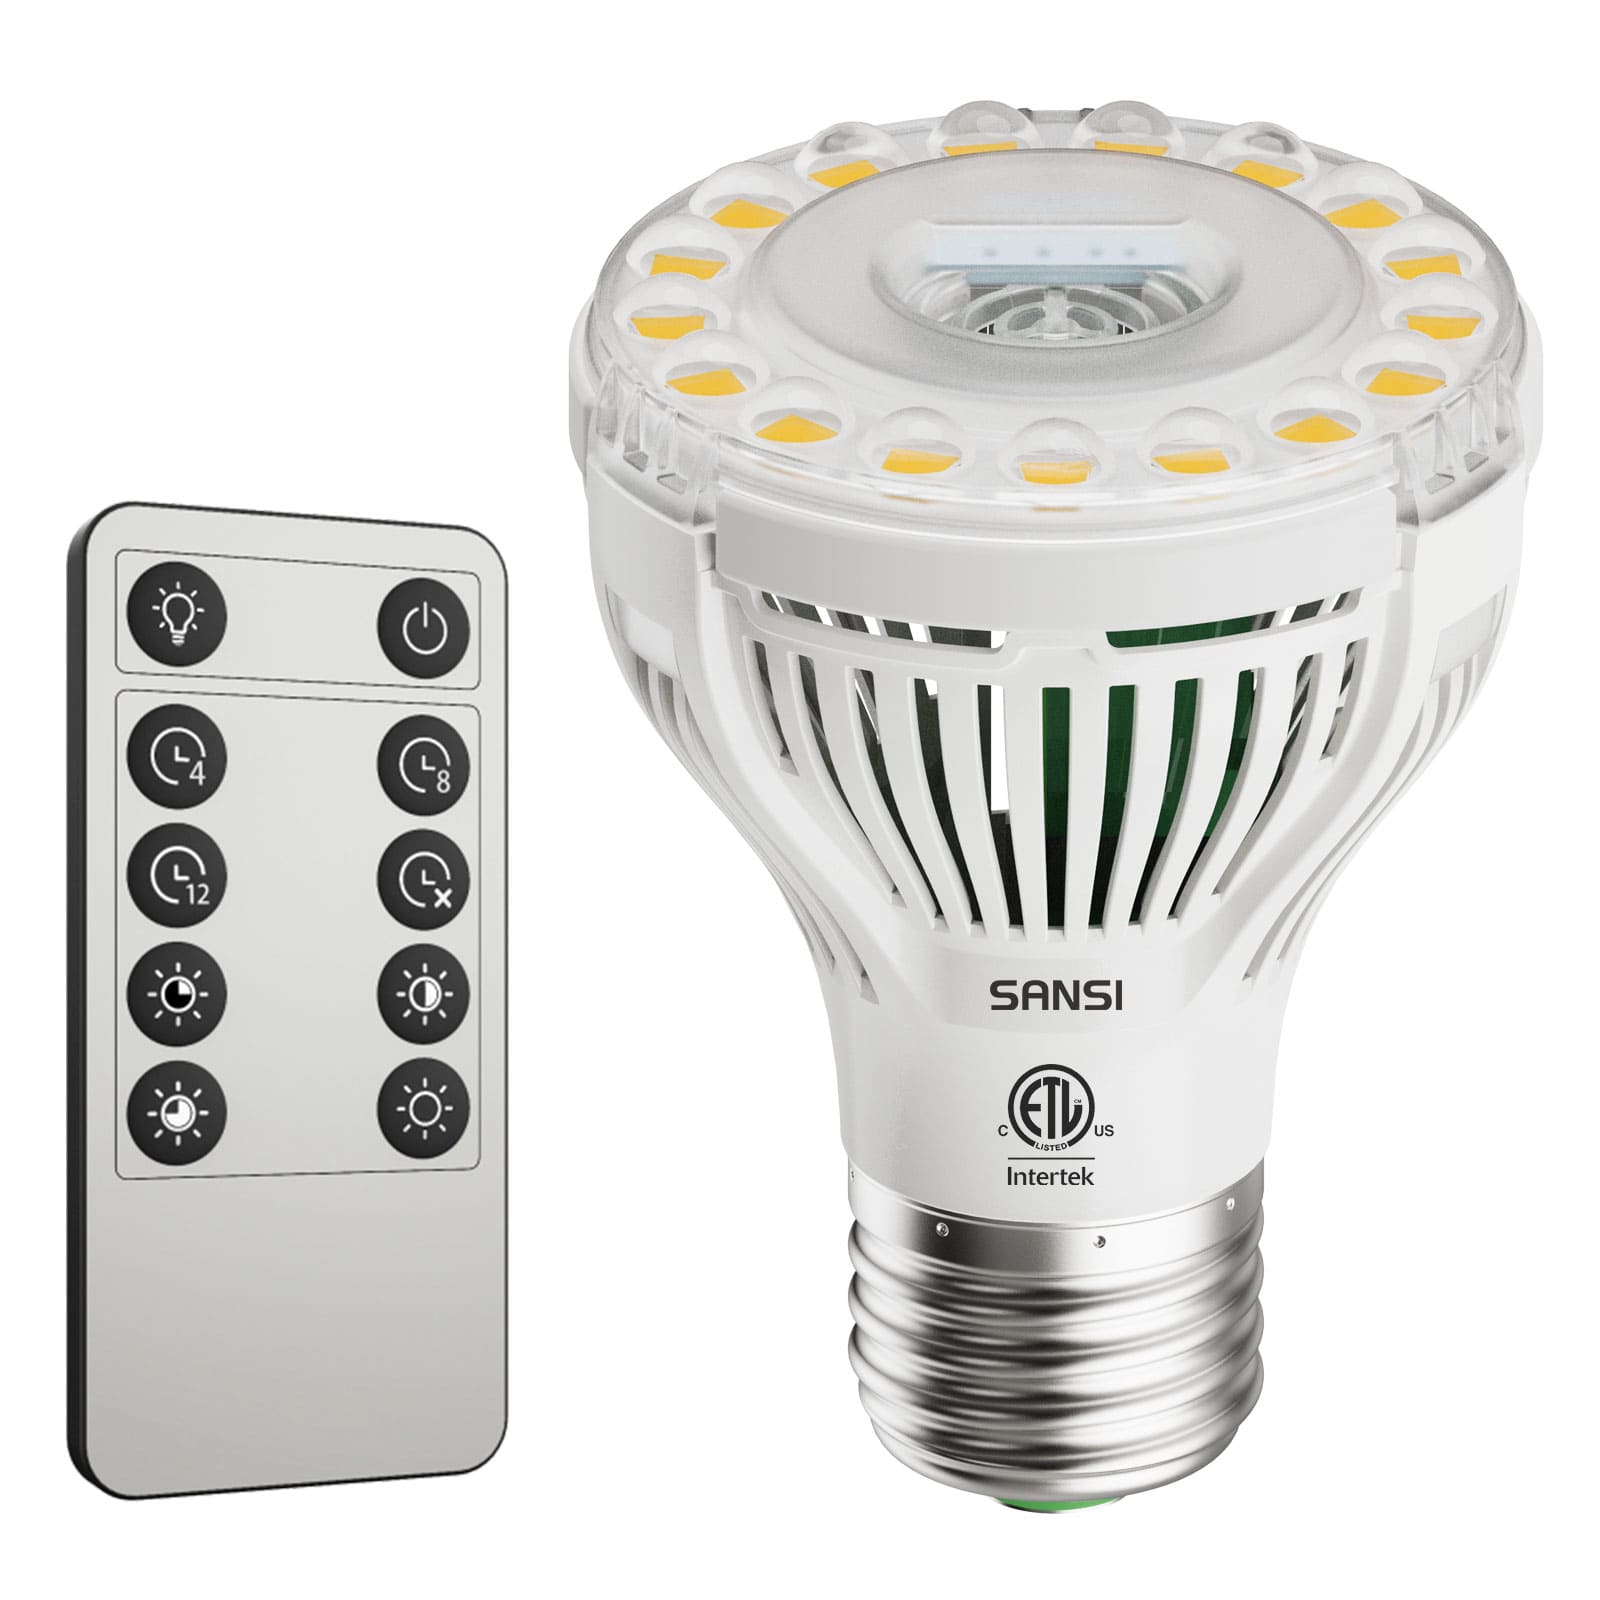 PAR20 5W LED Grow Light Bulb With Remote Control (US ONLY)